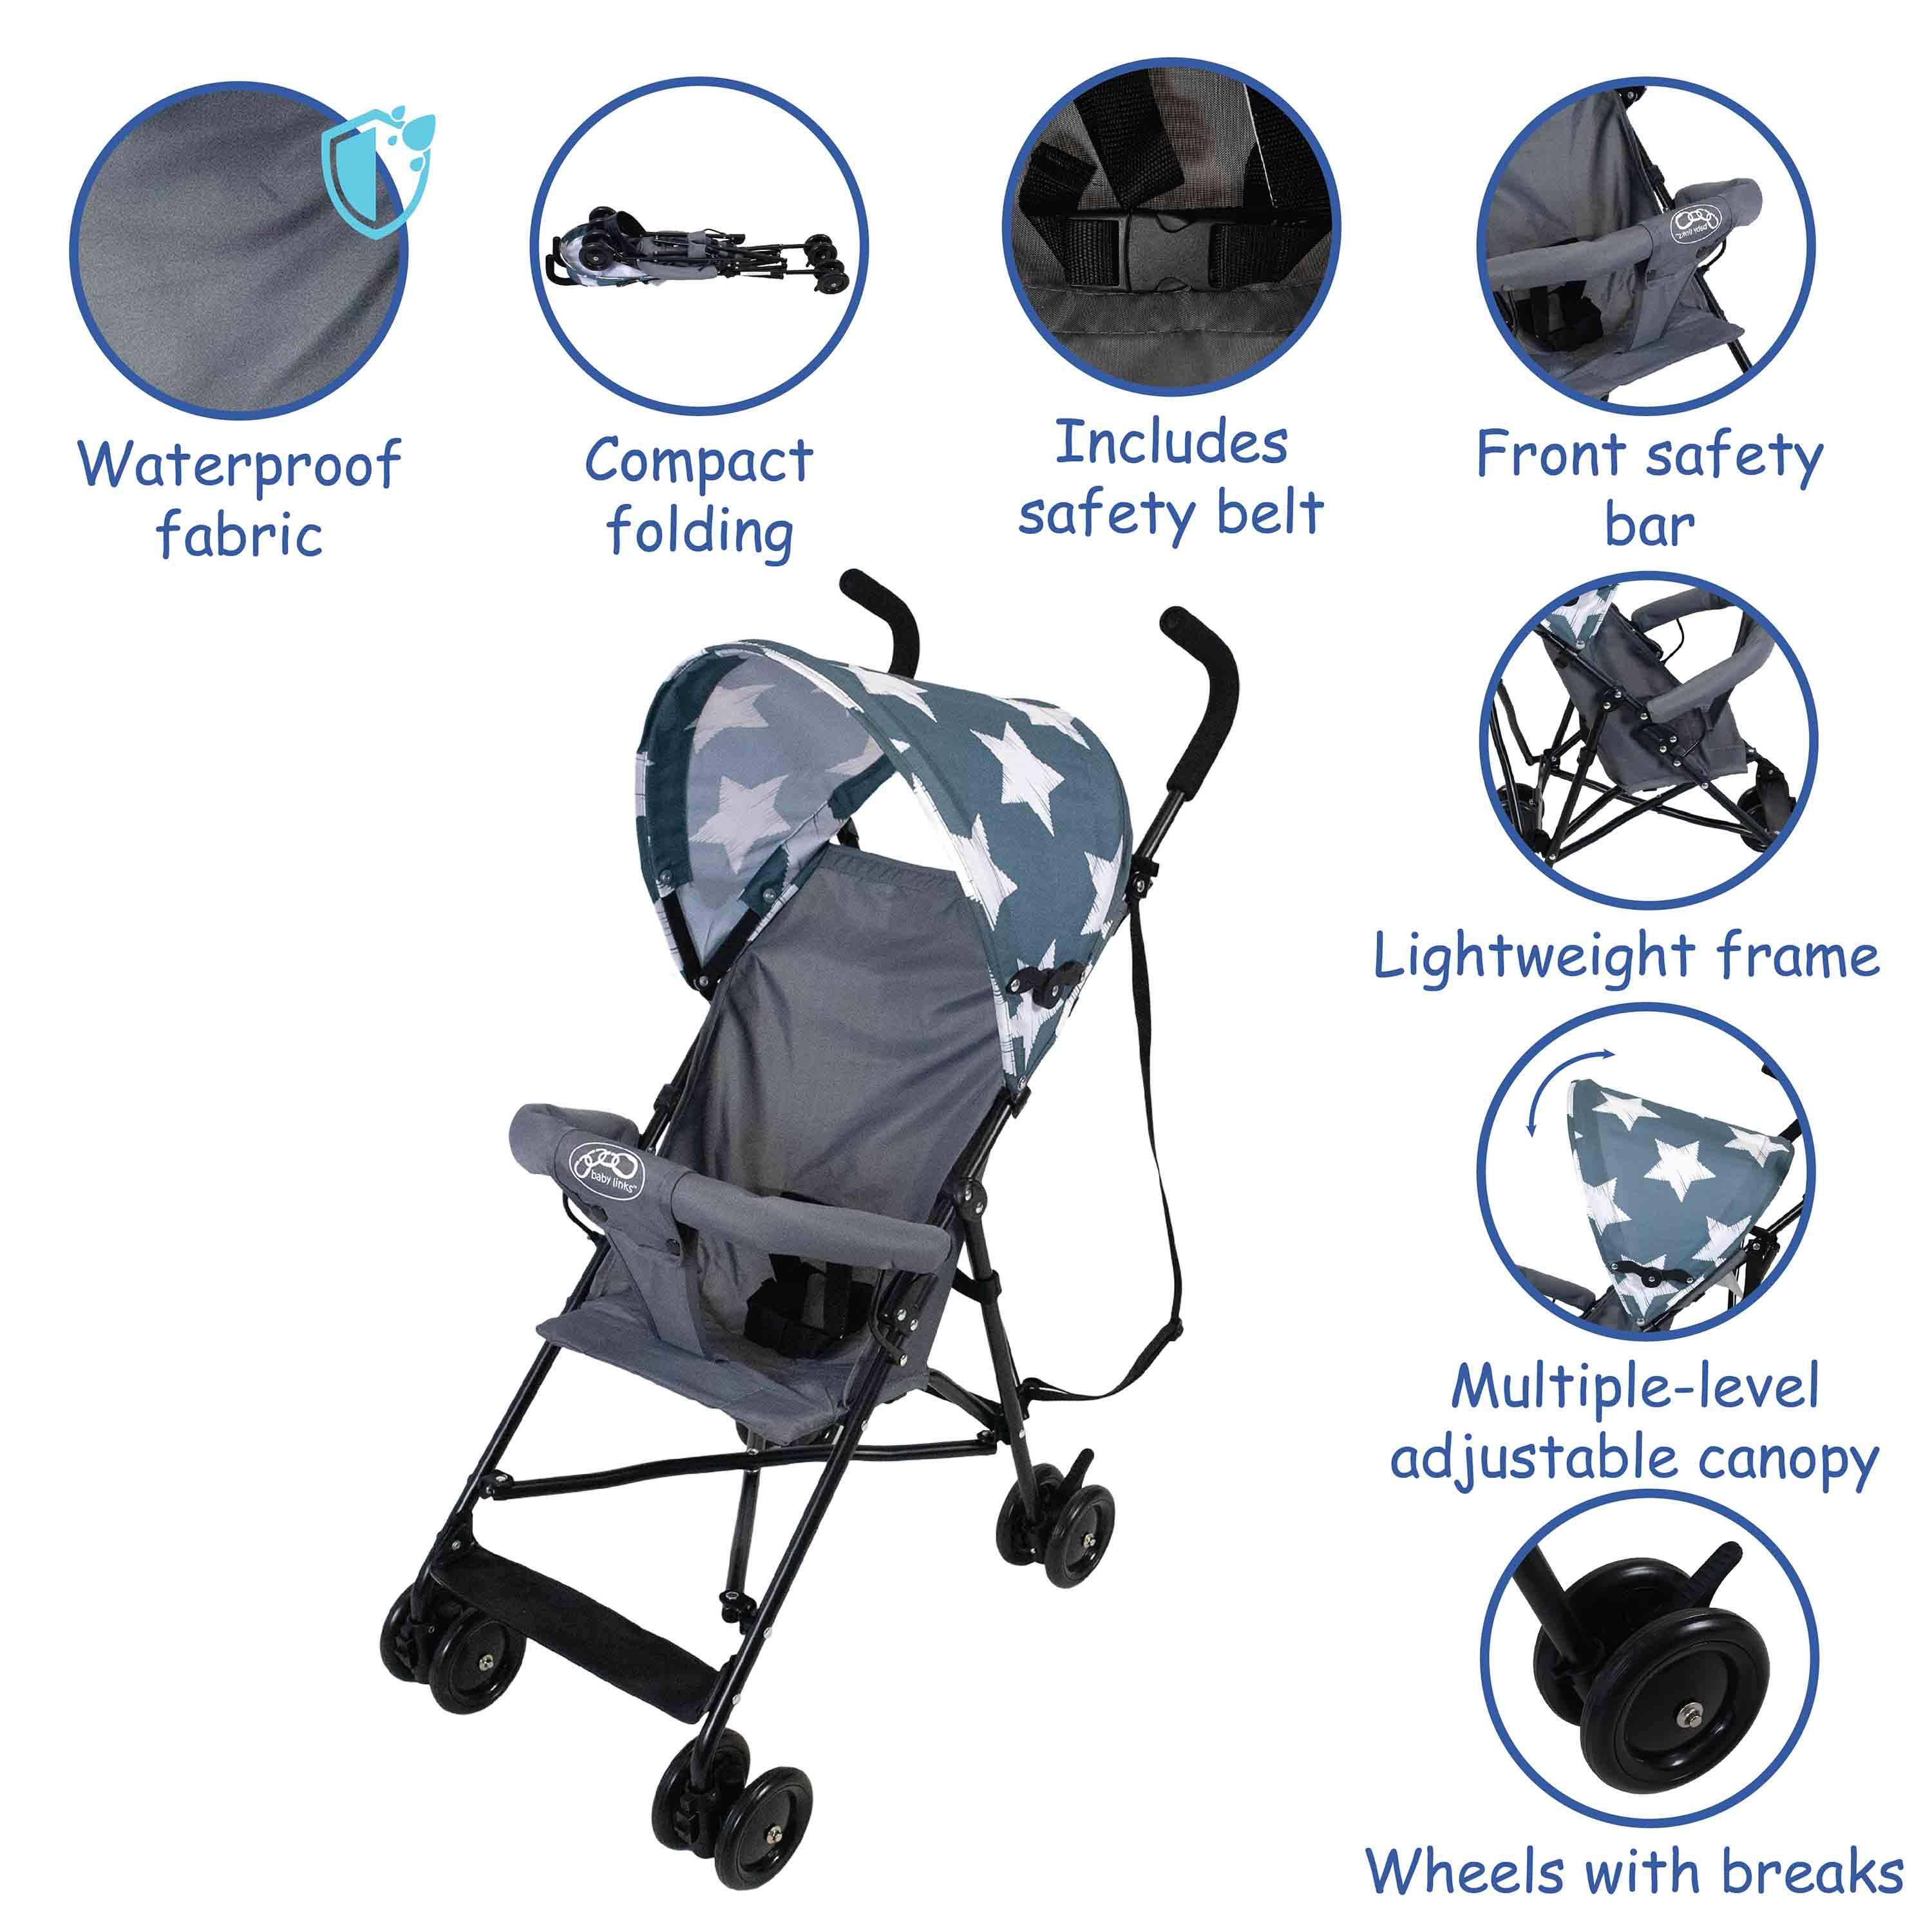 Star Basic Stroller with Waterproof Fabric - 4aKid